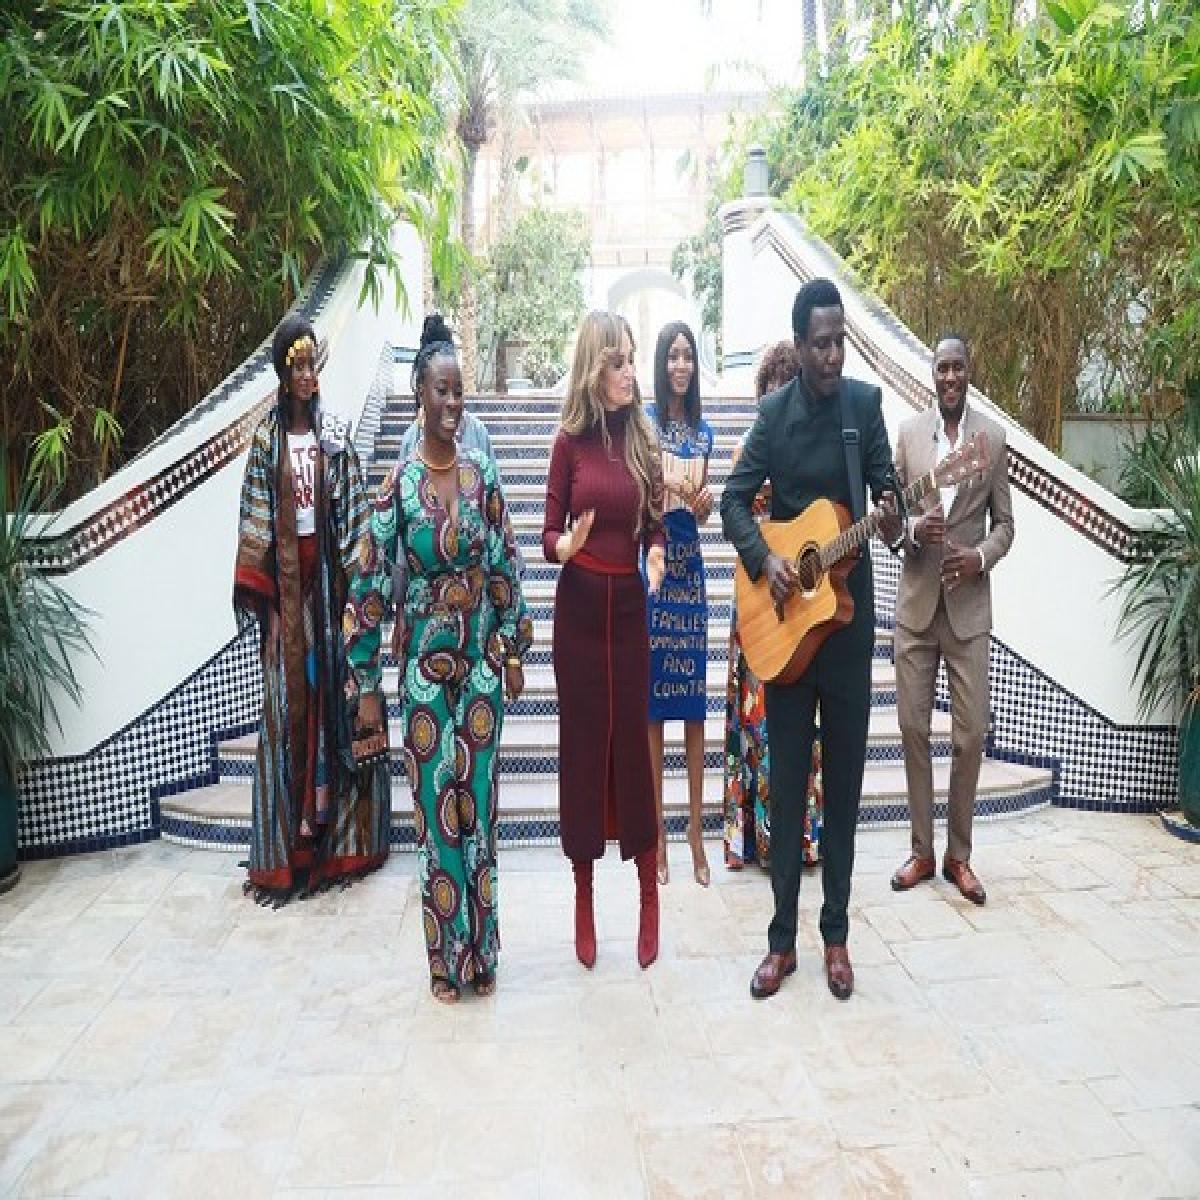 Merck Foundation Raises Awareness About Ending Child Marriage and Supporting Girl Education in Africa Through Two Zambian & Ugandan Songs